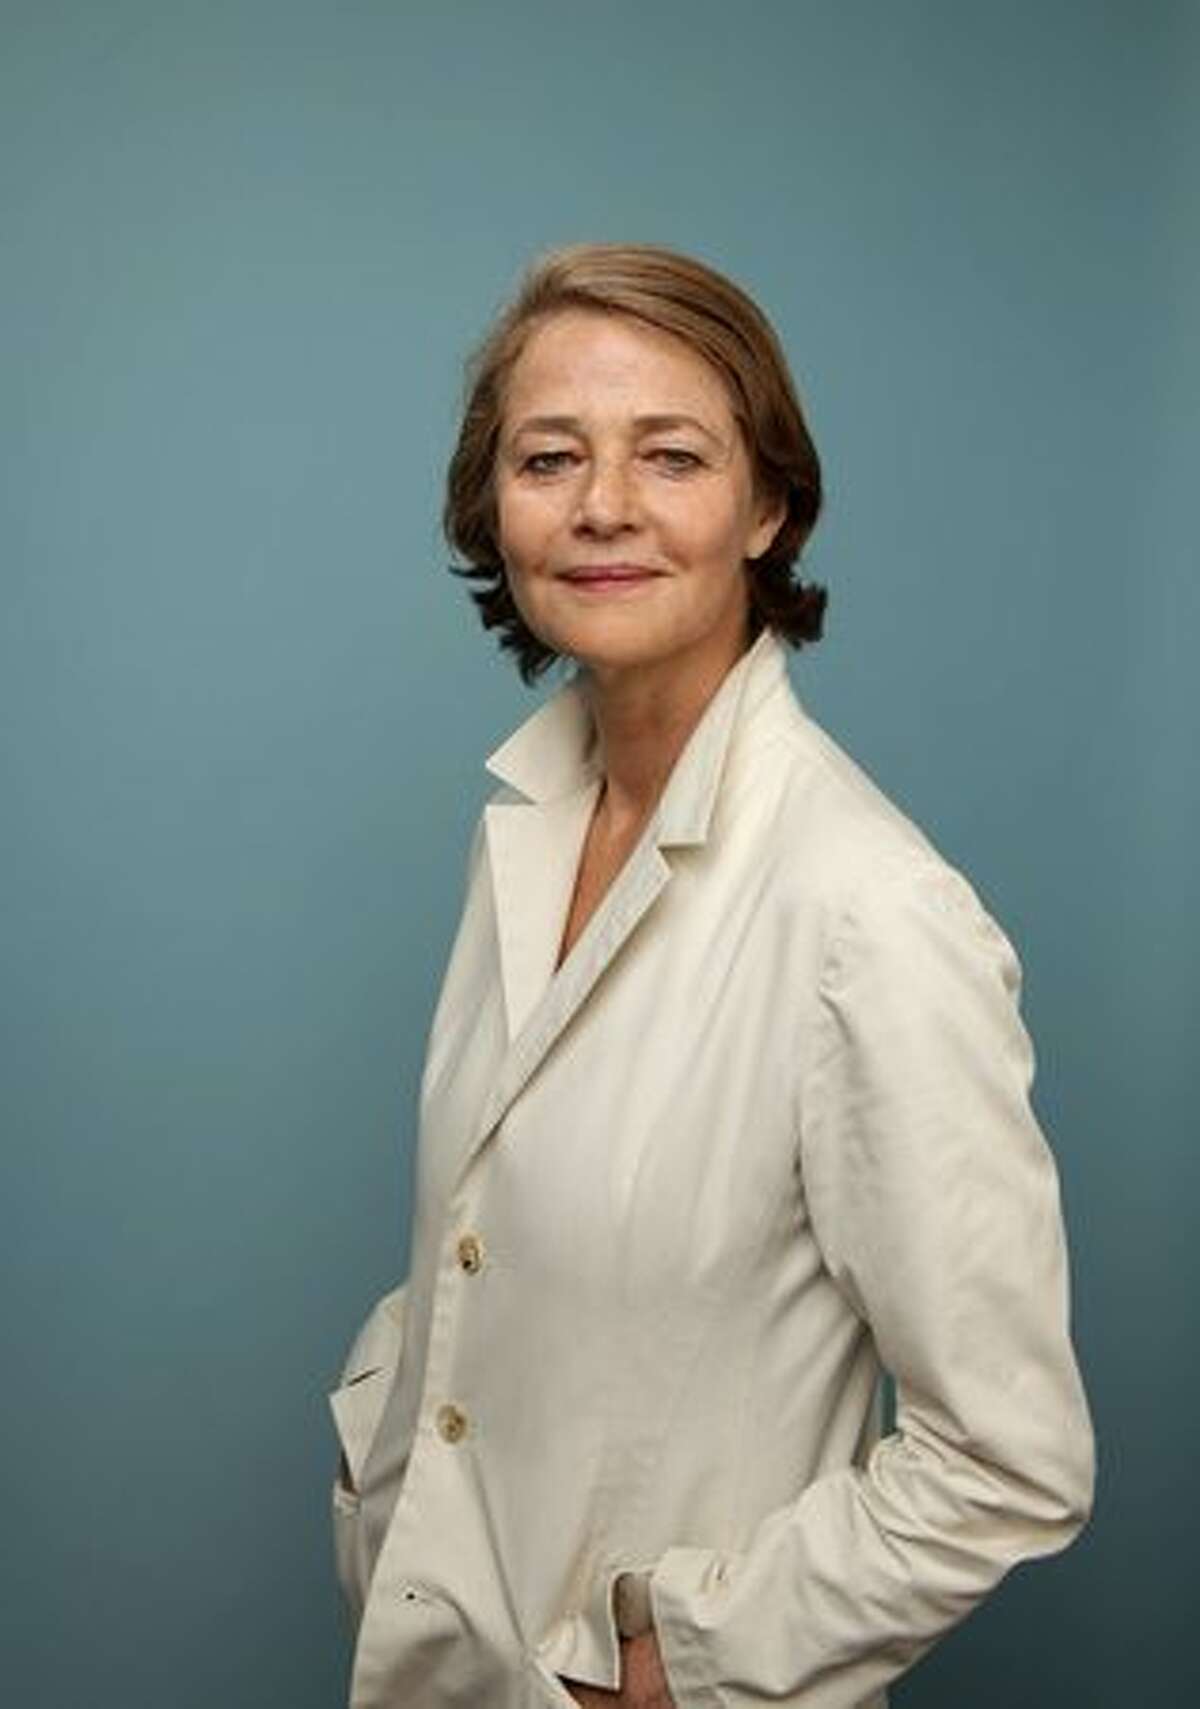 Actress Charlotte Rampling from "Rio Sex Comedy" poses for a portrait.